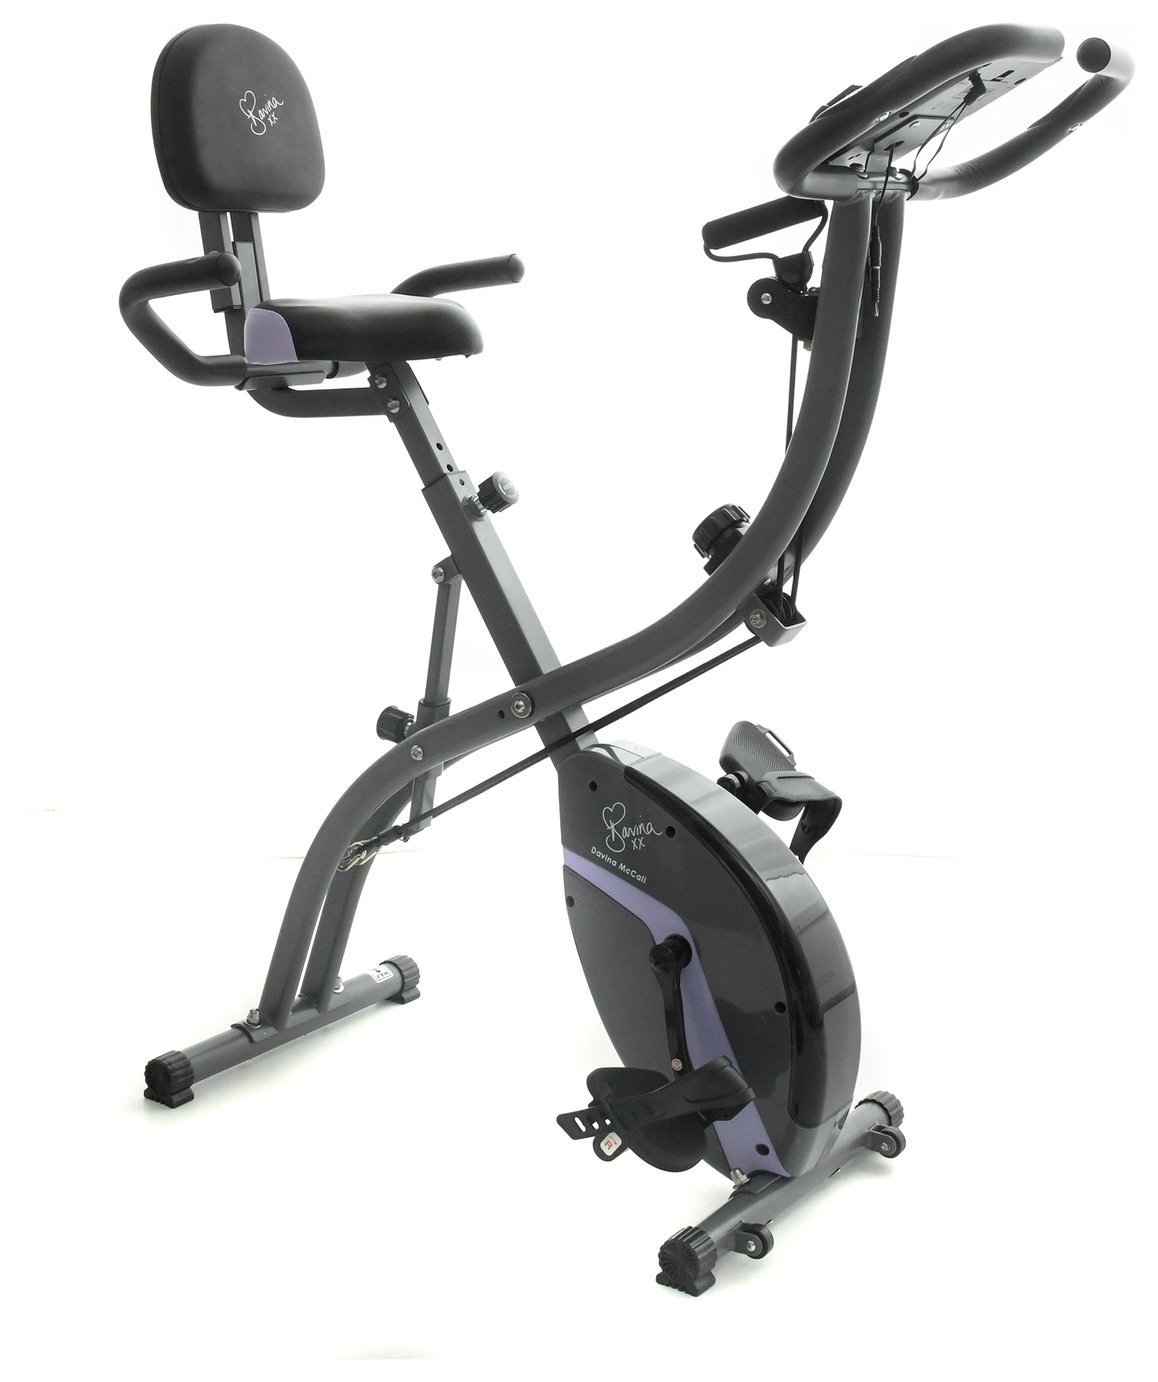 Davina McCall Folding Exercise Bike With Resistance Bands